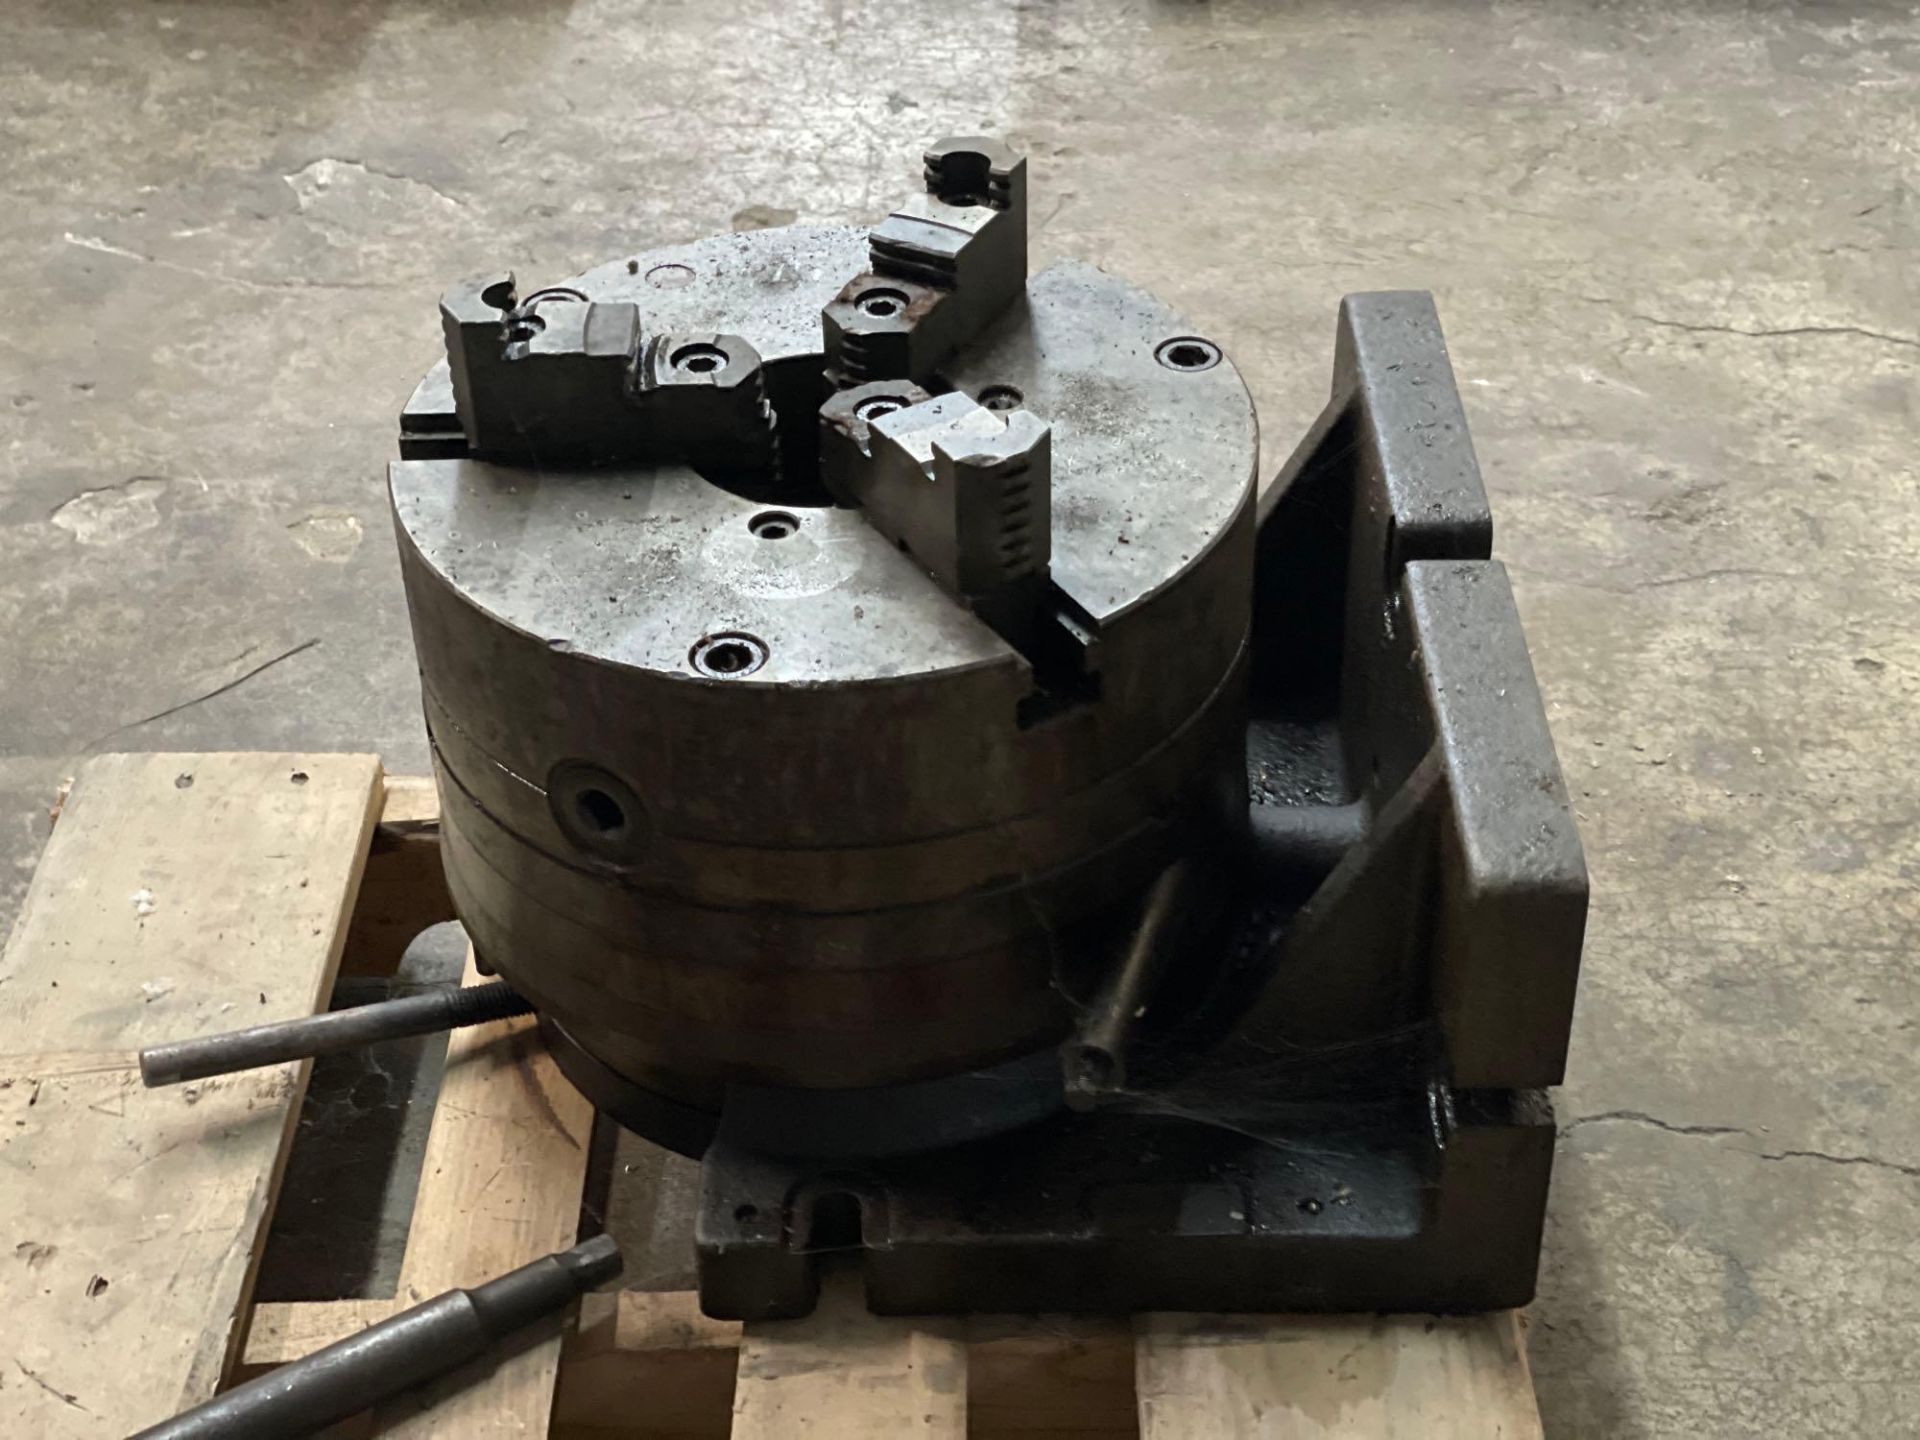 Horizontal and Vertical Mounting Rotary Table 12 1/2” 3 Jaw Chuck with 4” Thru Hole - Image 2 of 4